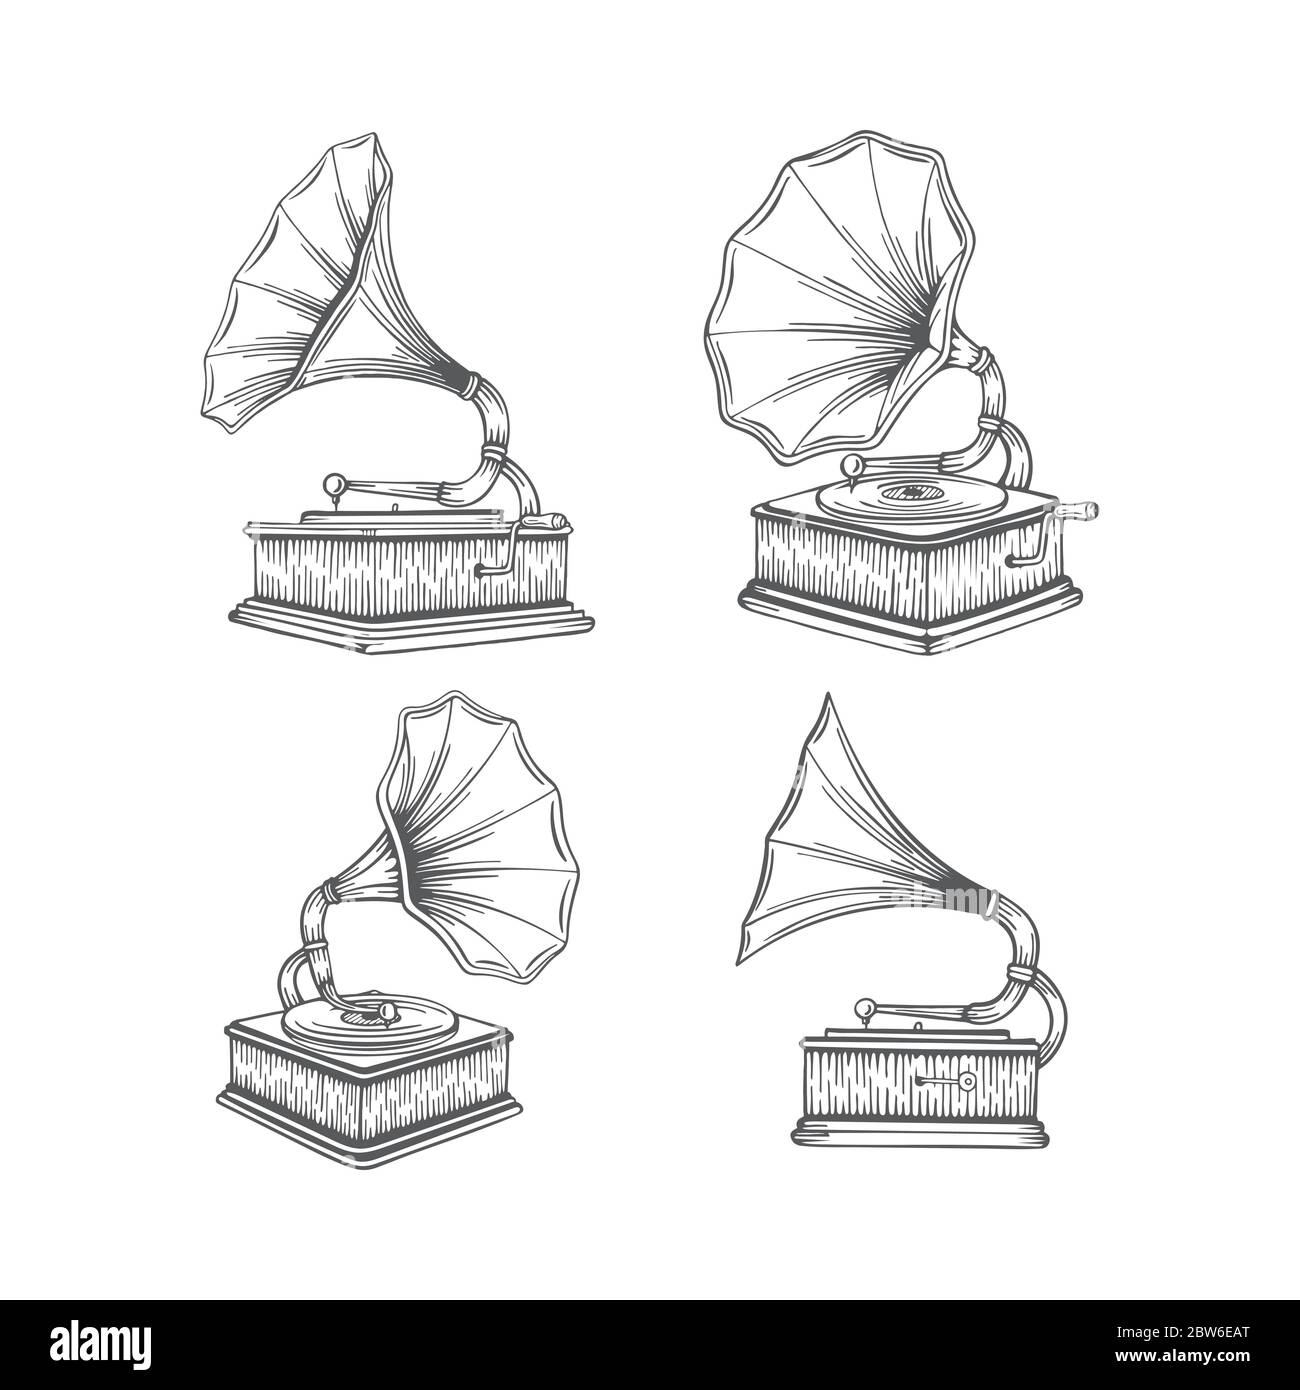 3824 Gramophone Stock Photos HighRes Pictures and Images  Getty Images